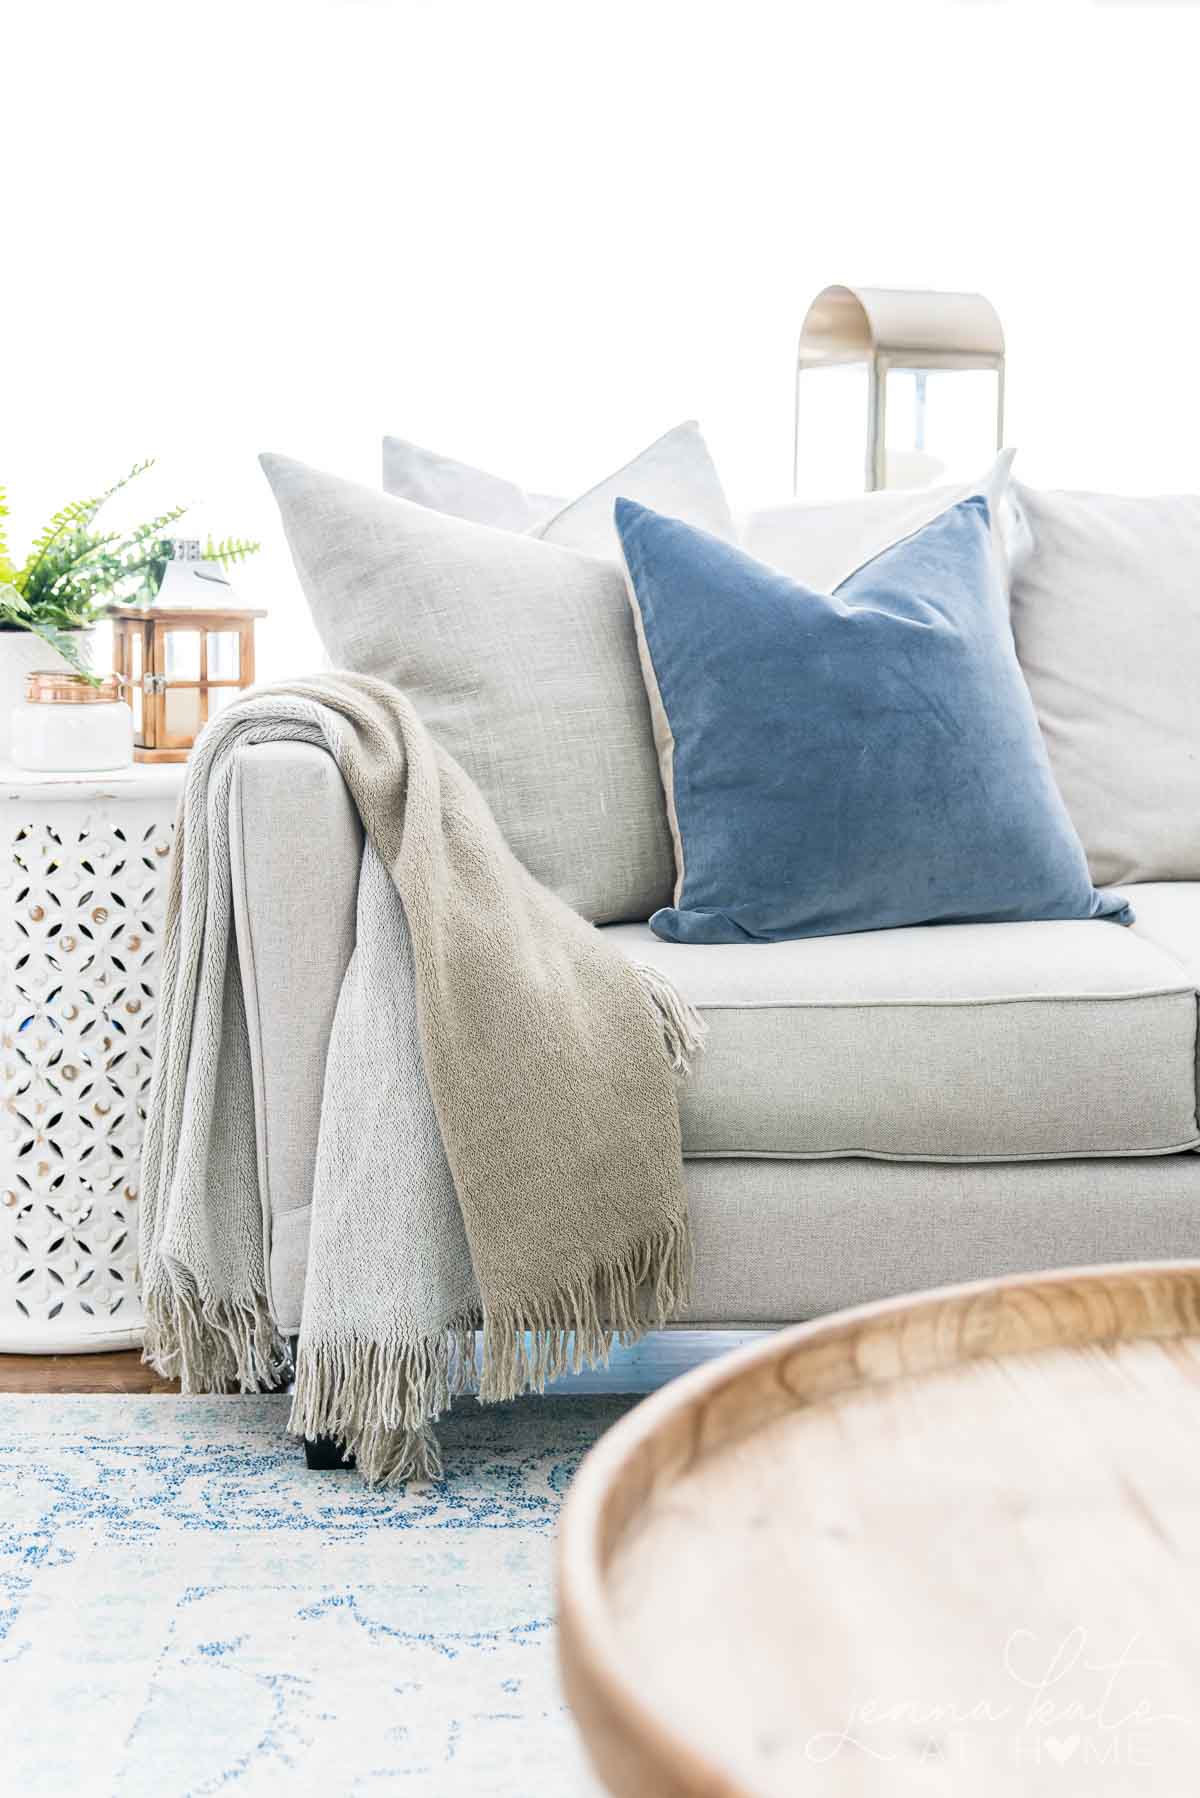 Throw Blankets Instantly Make a Couch Feel Cozy for fall